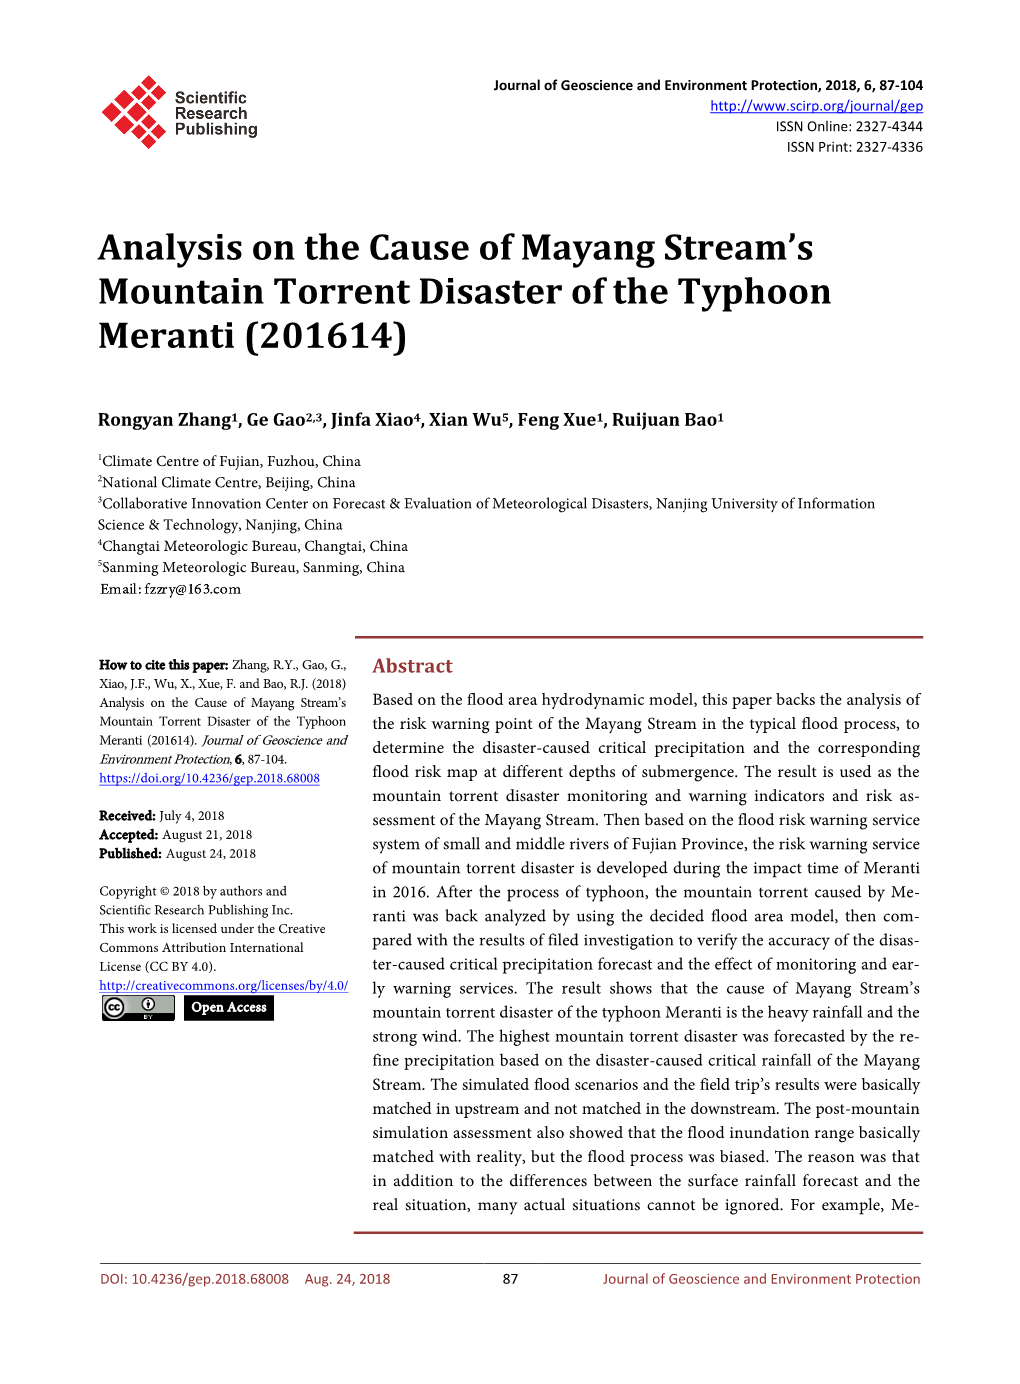 Analysis on the Cause of Mayang Stream’S Mountain Torrent Disaster of the Typhoon Meranti (201614)